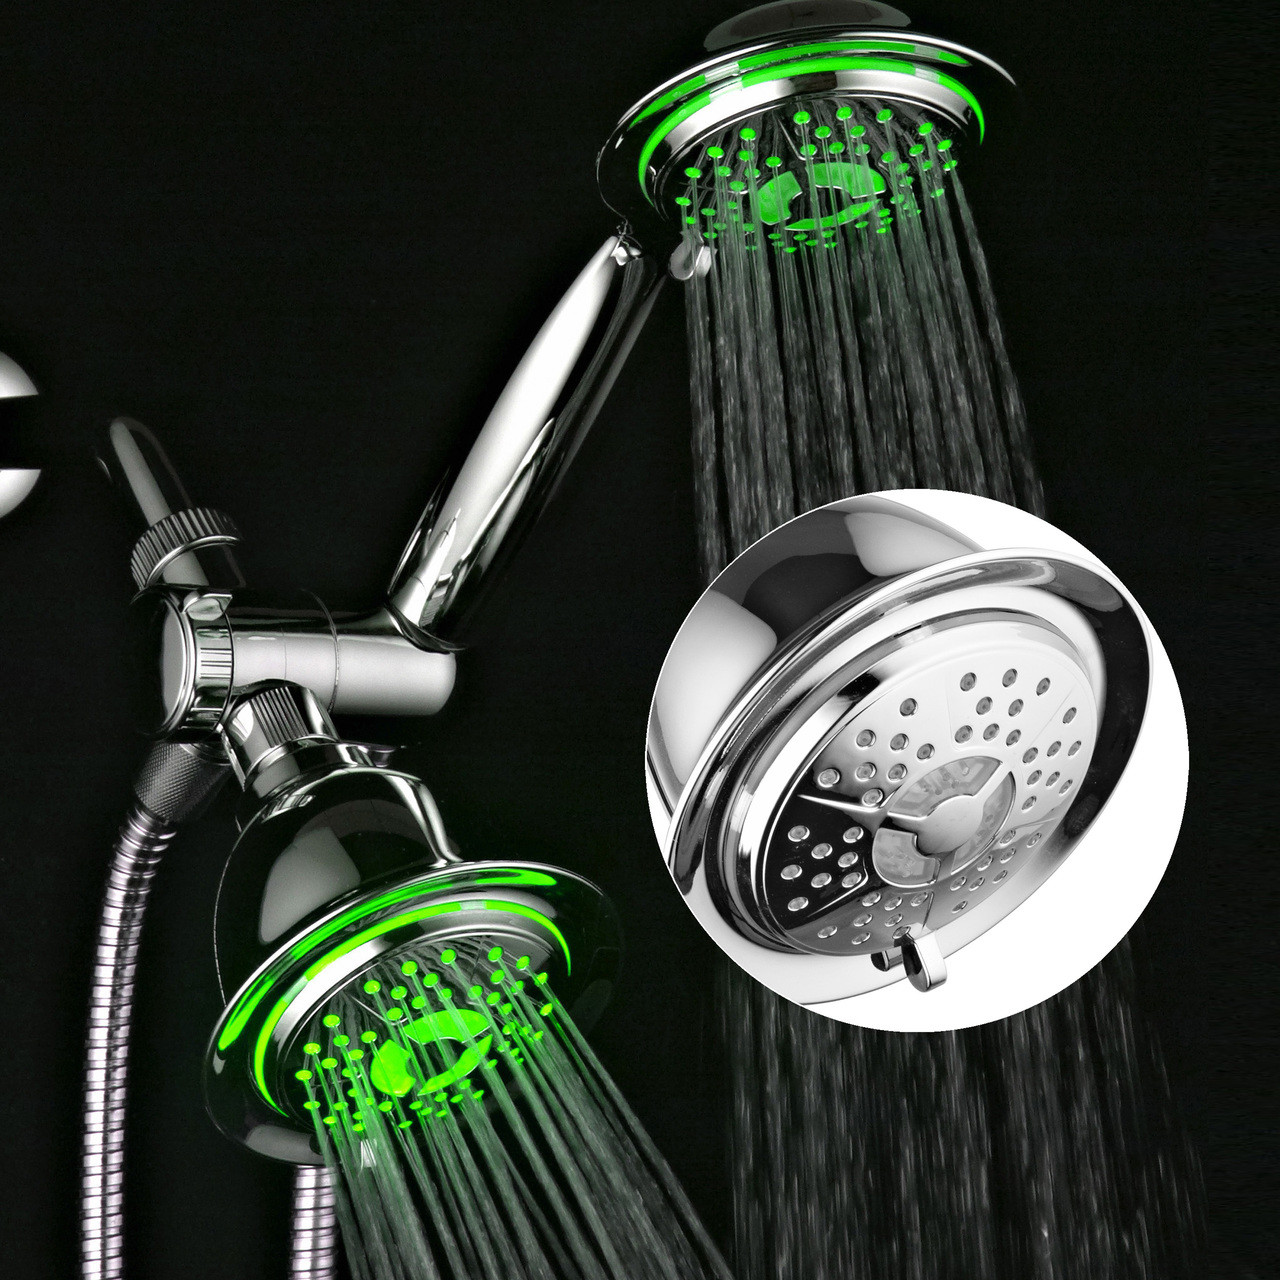 PowerSpa 4-Inch Handheld LED Showerhead with Pressure-Boost Nozzle Technology